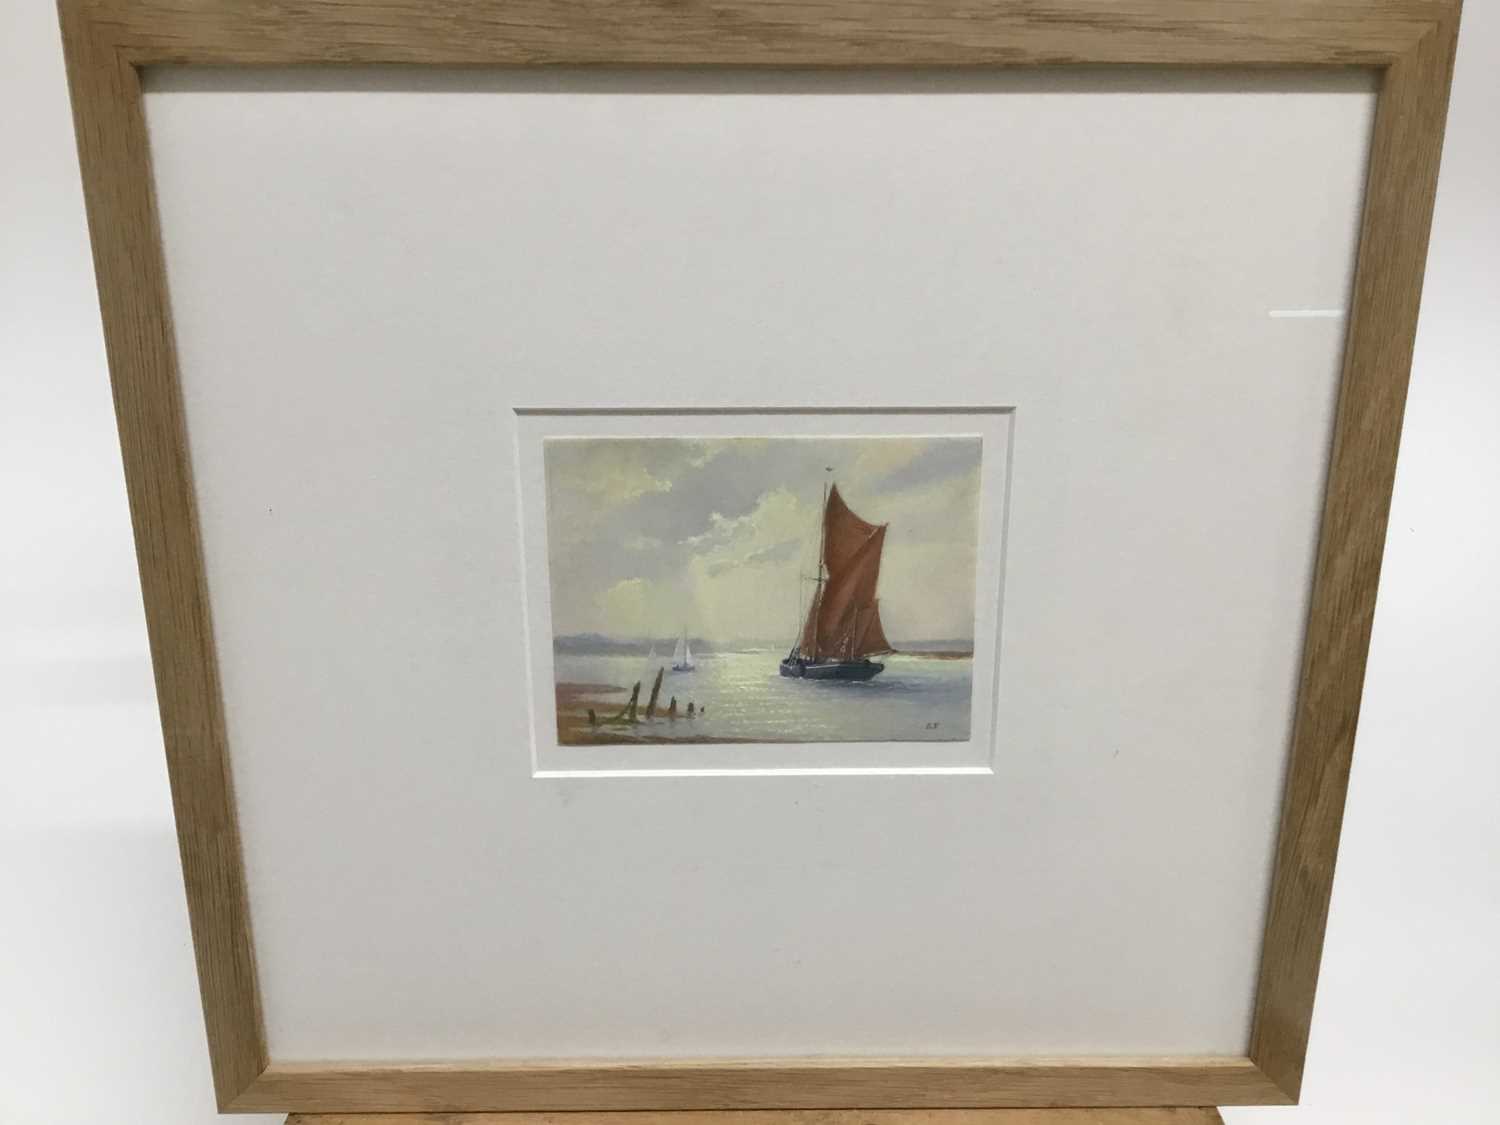 Sheila Fairman, contemporary, oil on ivorine panel - Returning Home, initialled, in glazed frame, 8. - Image 2 of 3